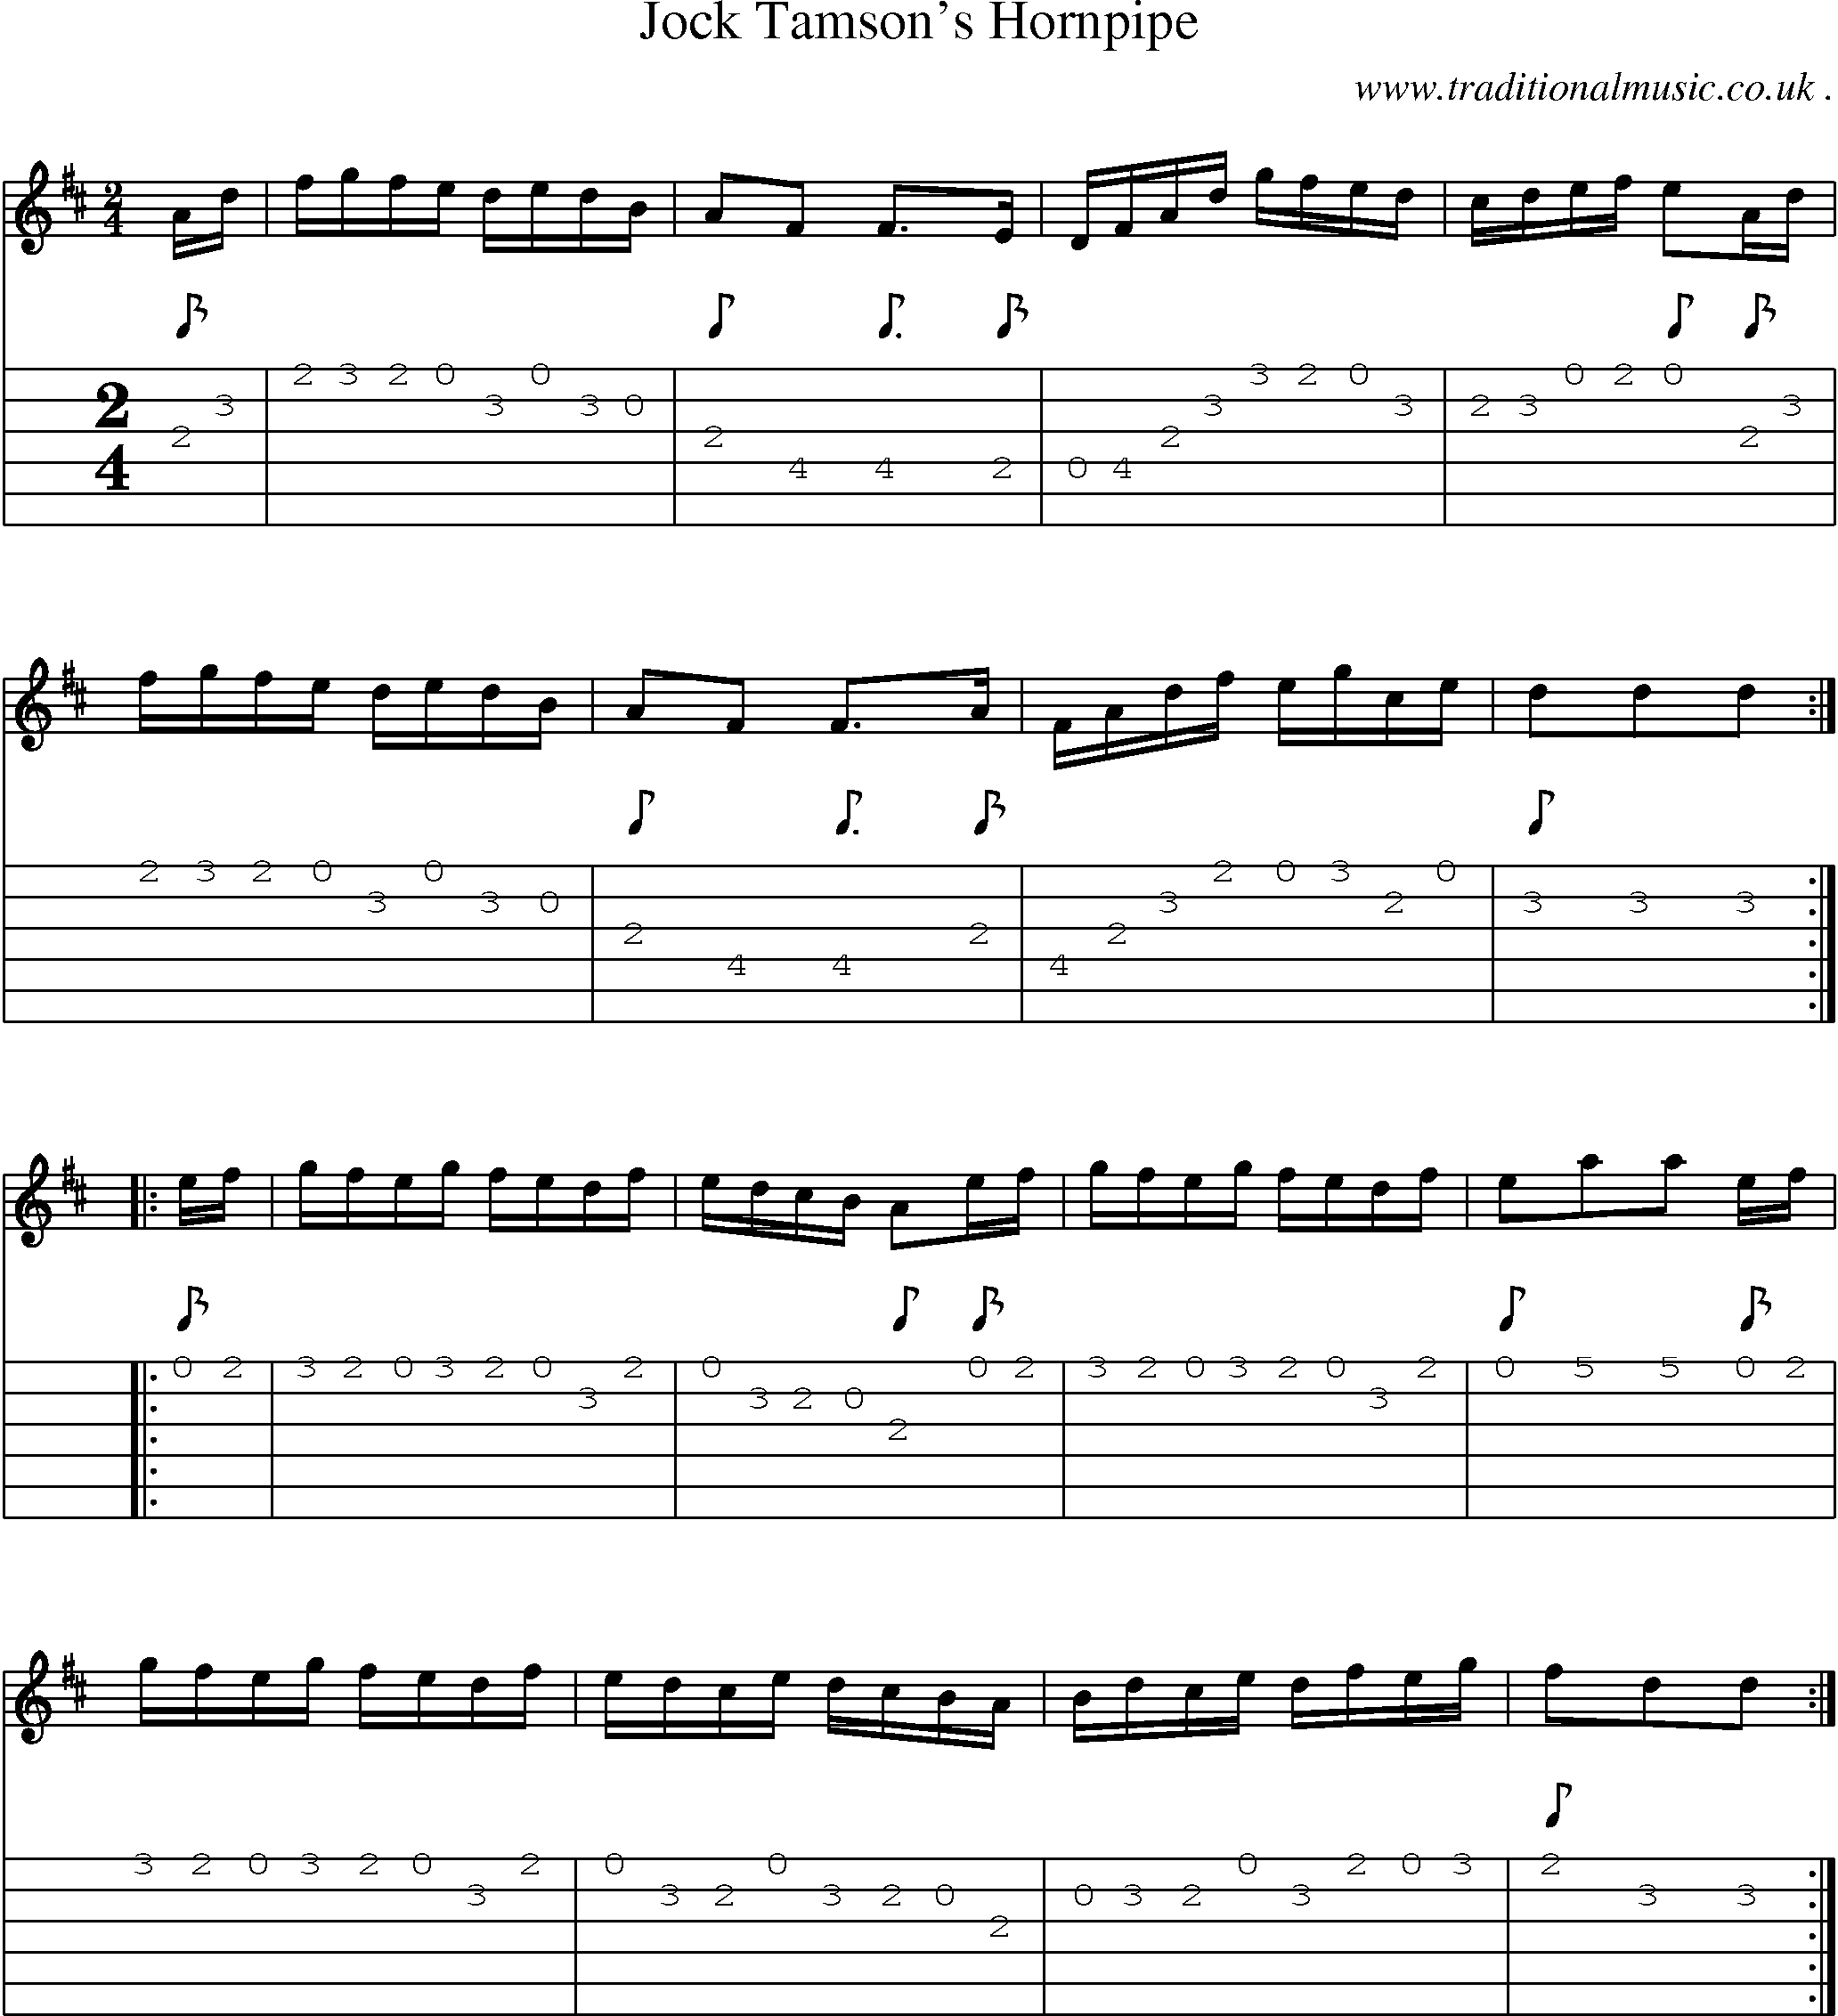 Sheet-Music and Guitar Tabs for Jock Tamsons Hornpipe